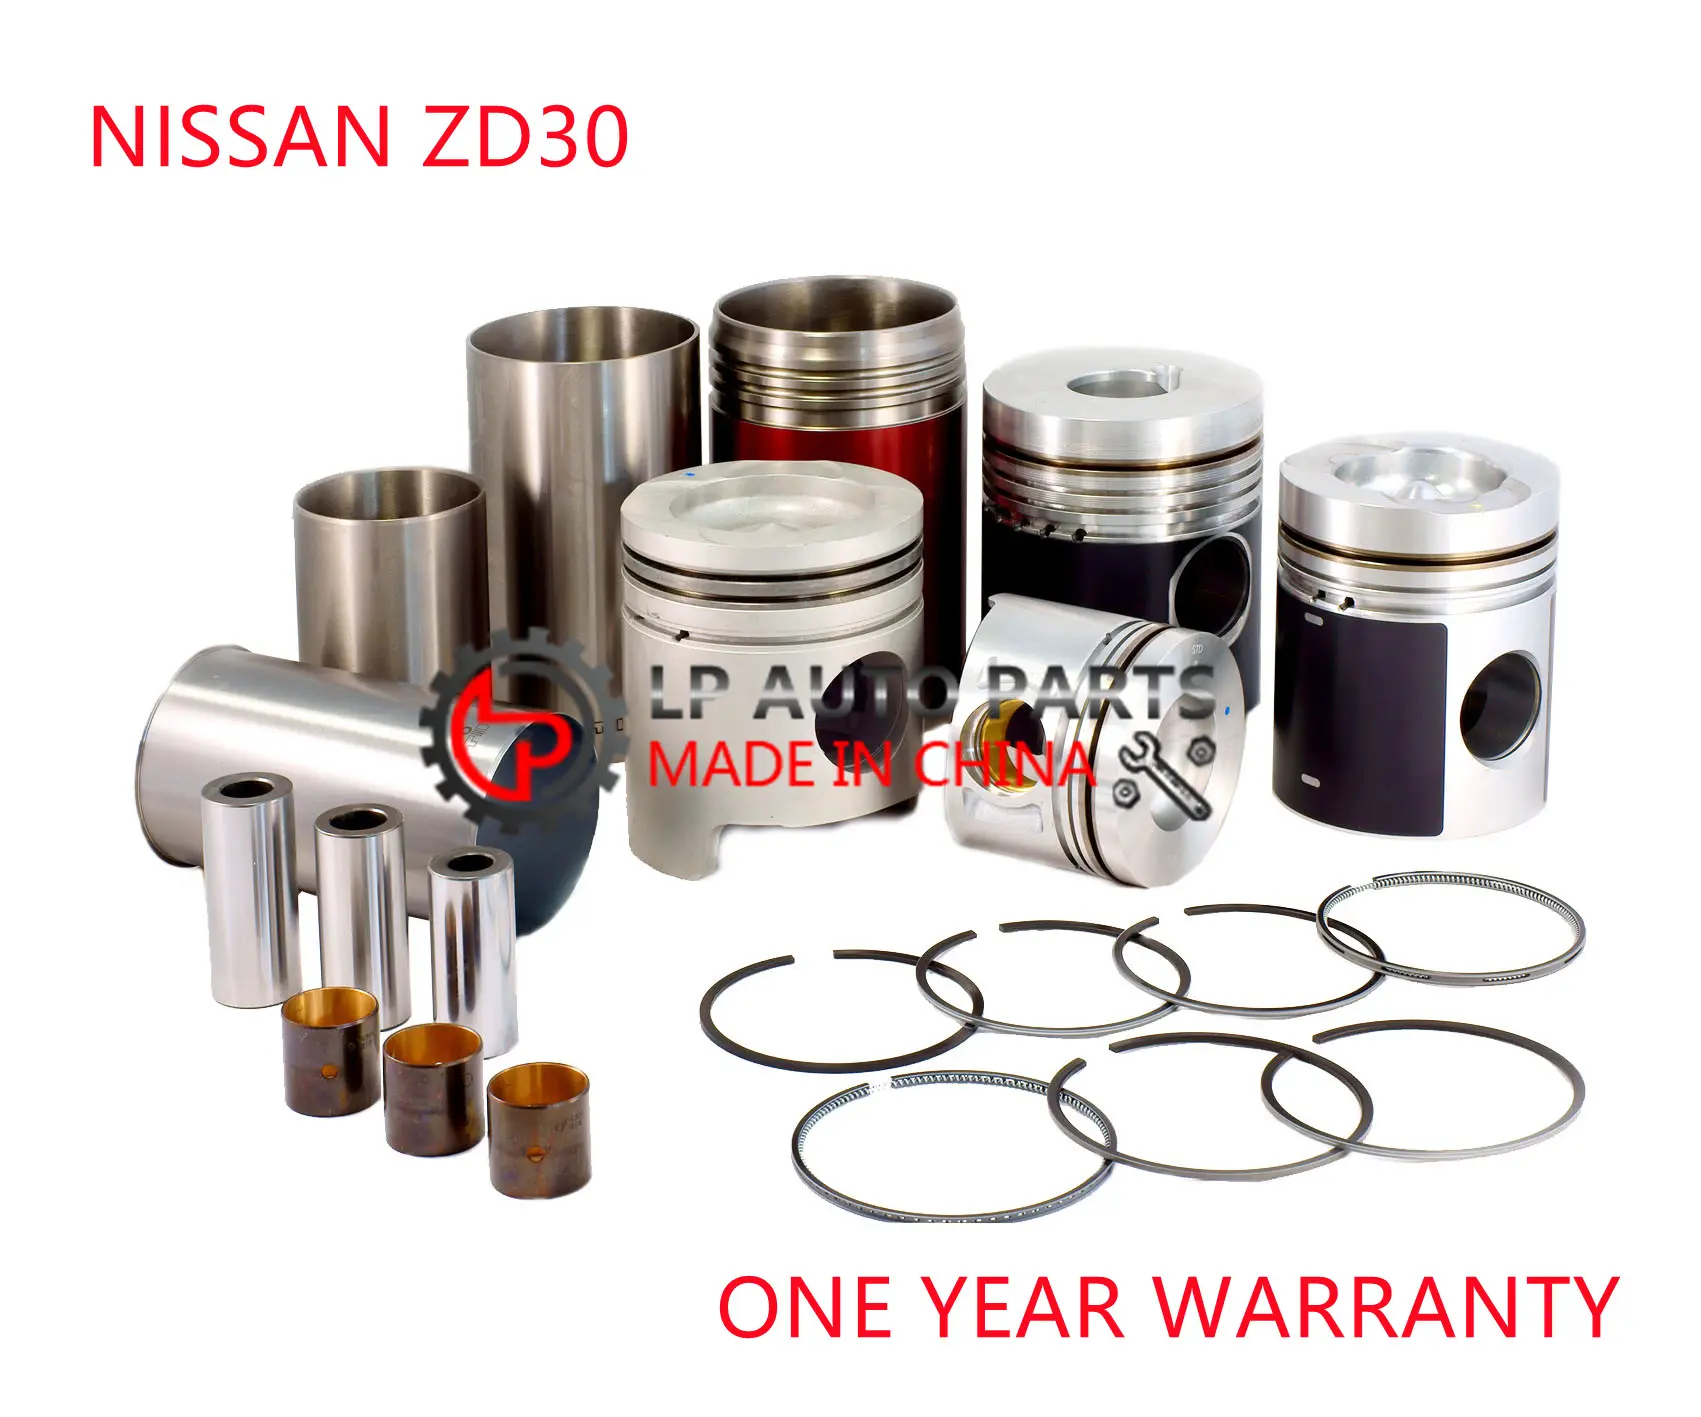 Diesel Engine Spare Parts 12010-VC101 12010-VK600 ENGING PISTON PISTONS FOR NISSAN ZD30 NT500 KING